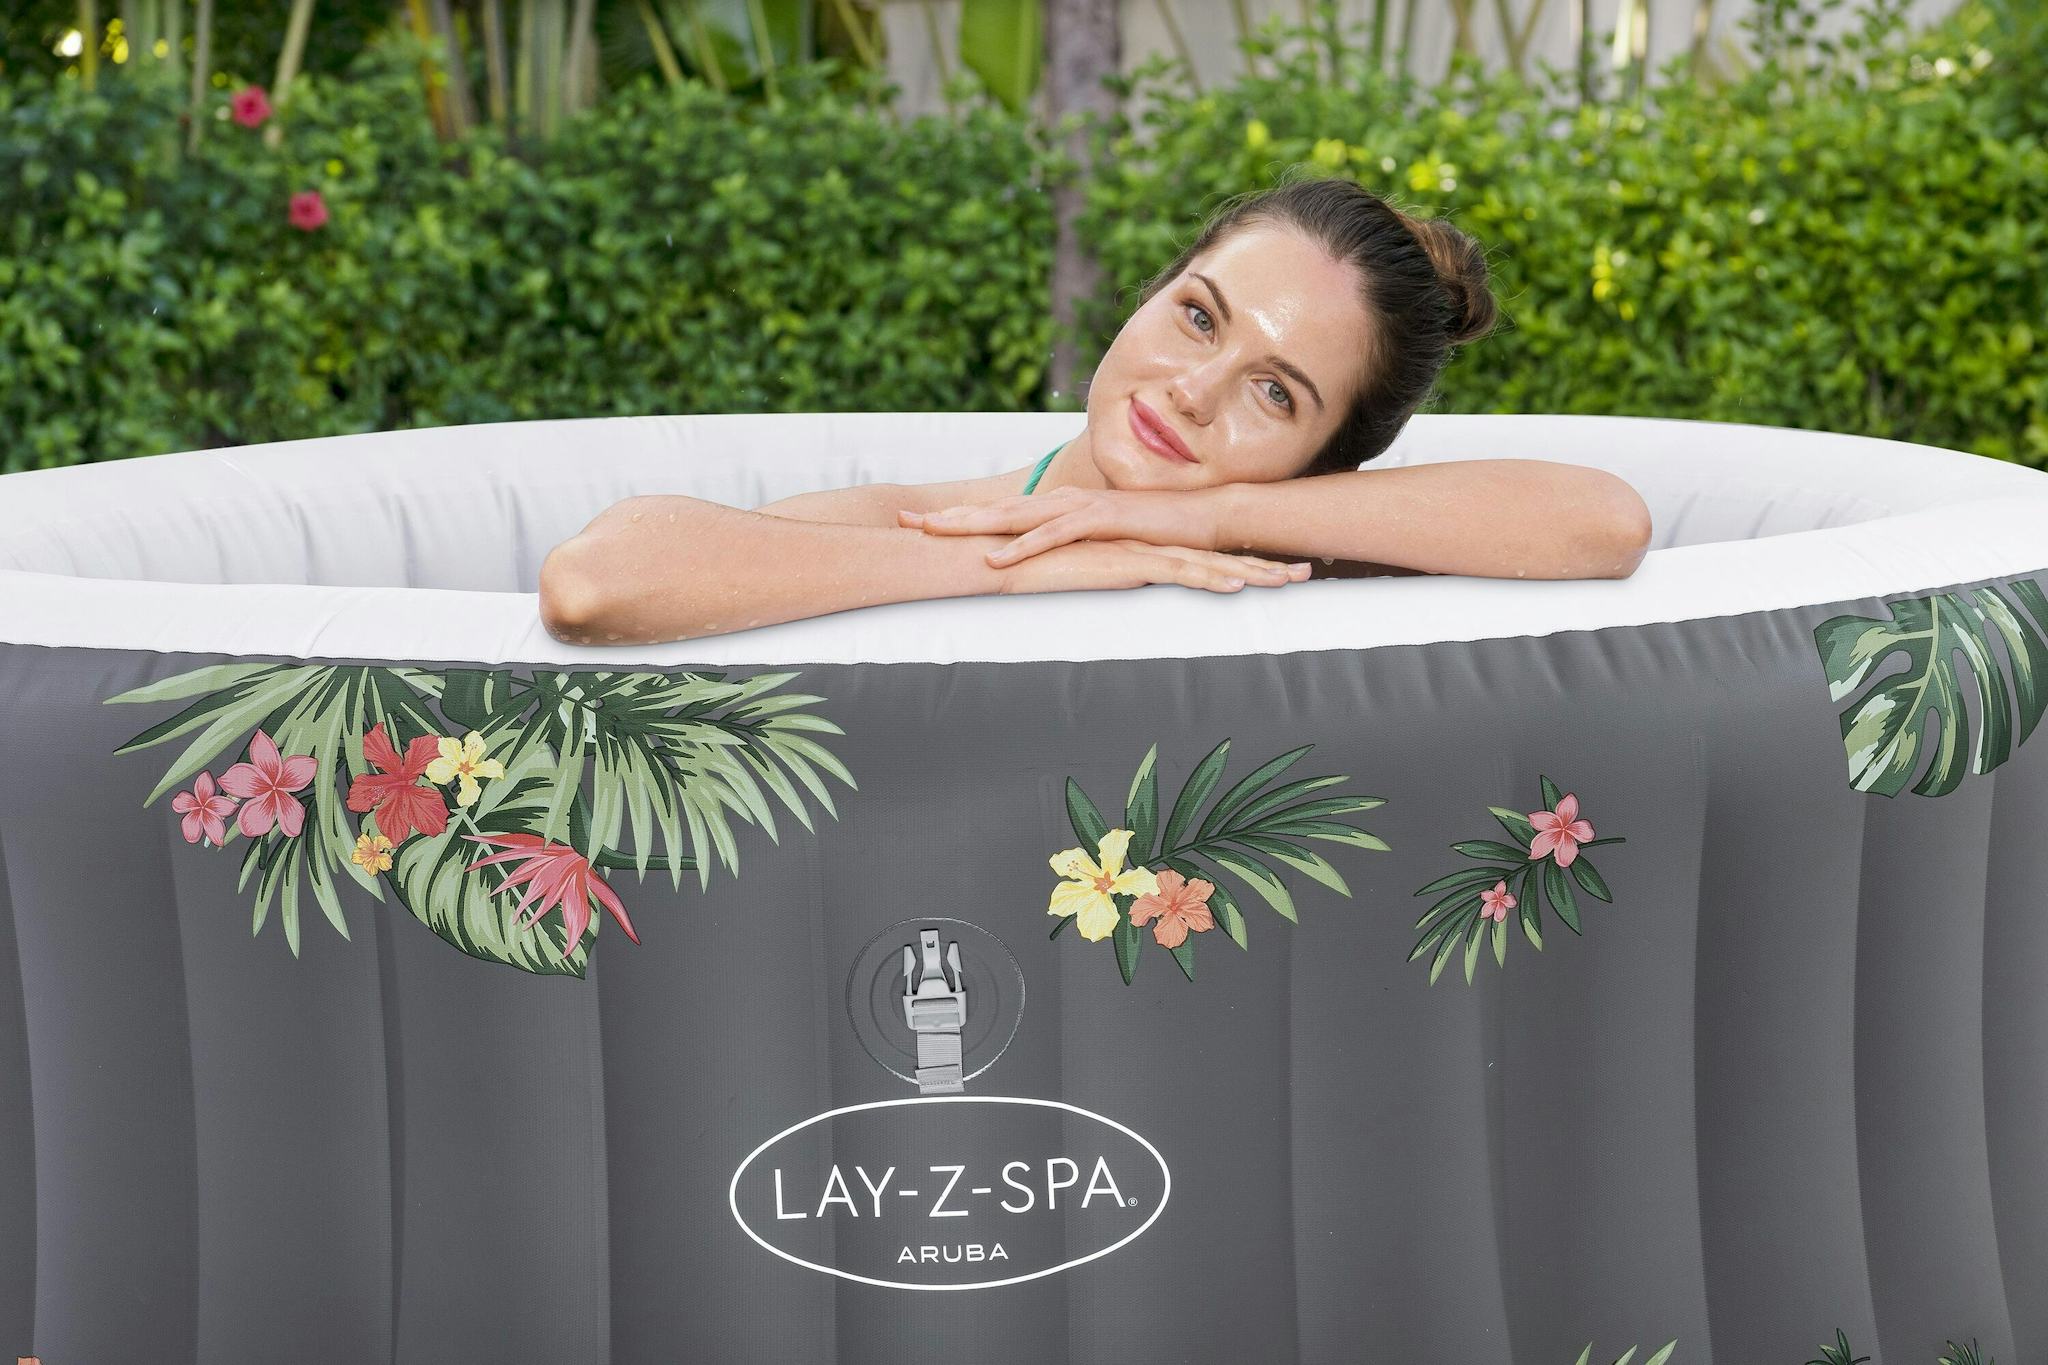 Spas Gonflables Spa gonflable rond Lay-Z-Spa Aruba Airjet™ 2 - 3 personnes Bestway 28